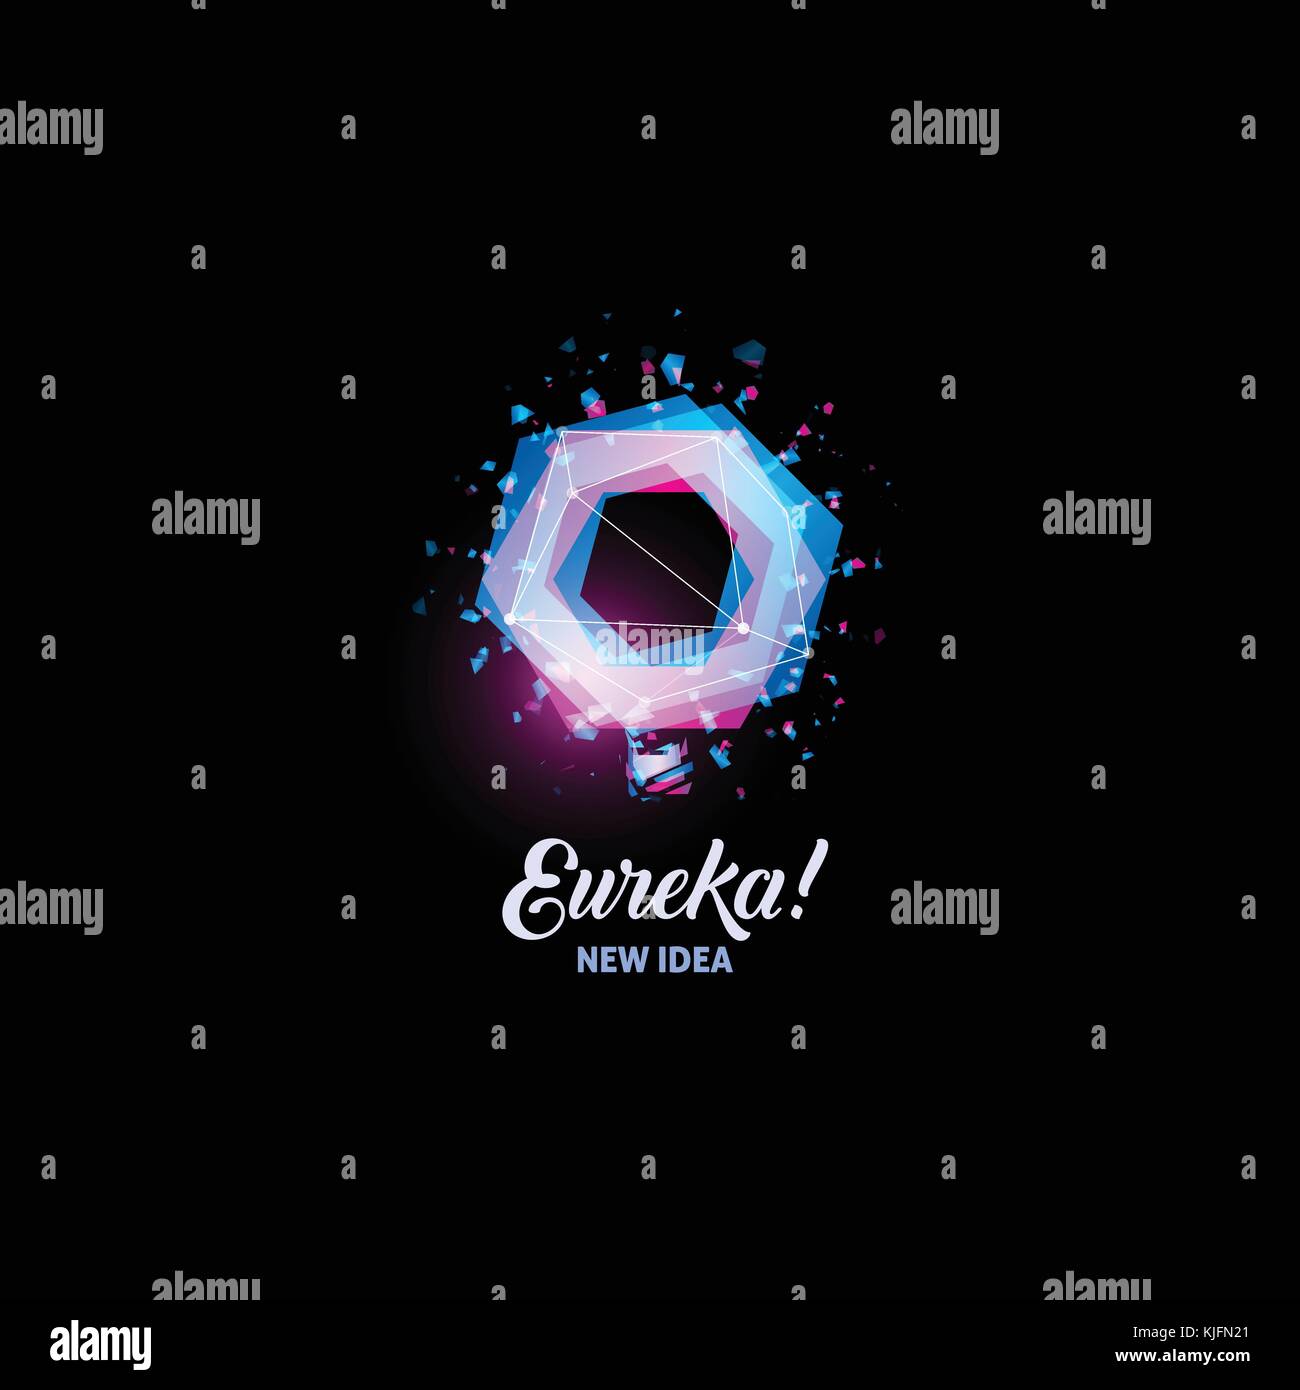 Eureka, new idea logo, light bulb abstract vector icon. Isolated pink and blue color polygons shape, stylized lamp with text. Digital innovation technology vector illustration. Stock Vector